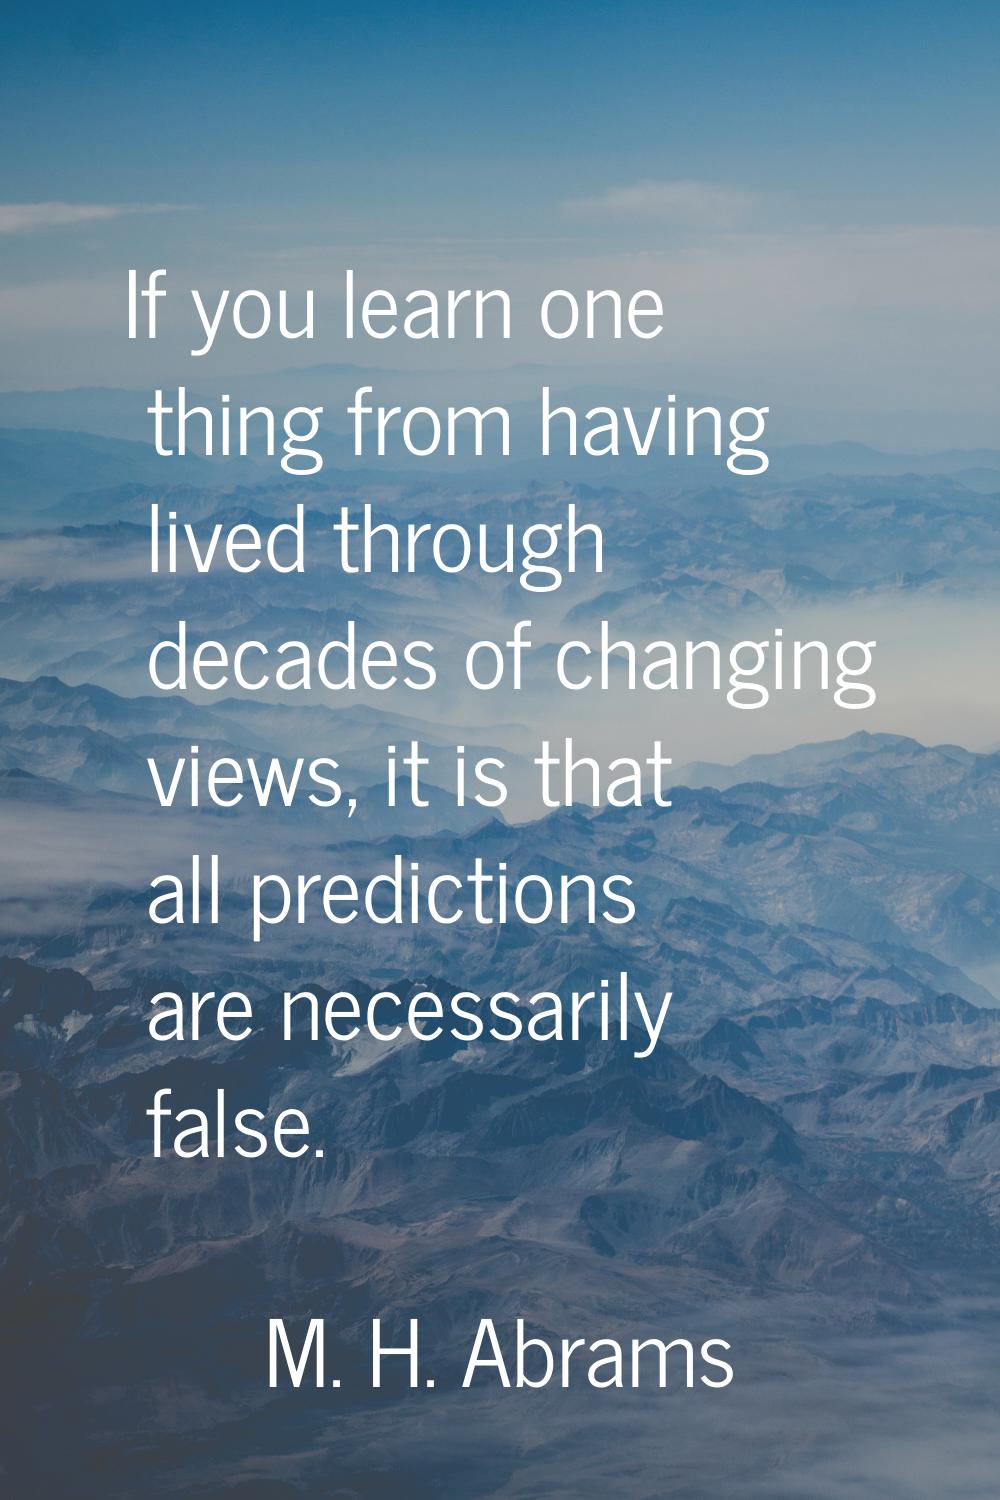 If you learn one thing from having lived through decades of changing views, it is that all predicti